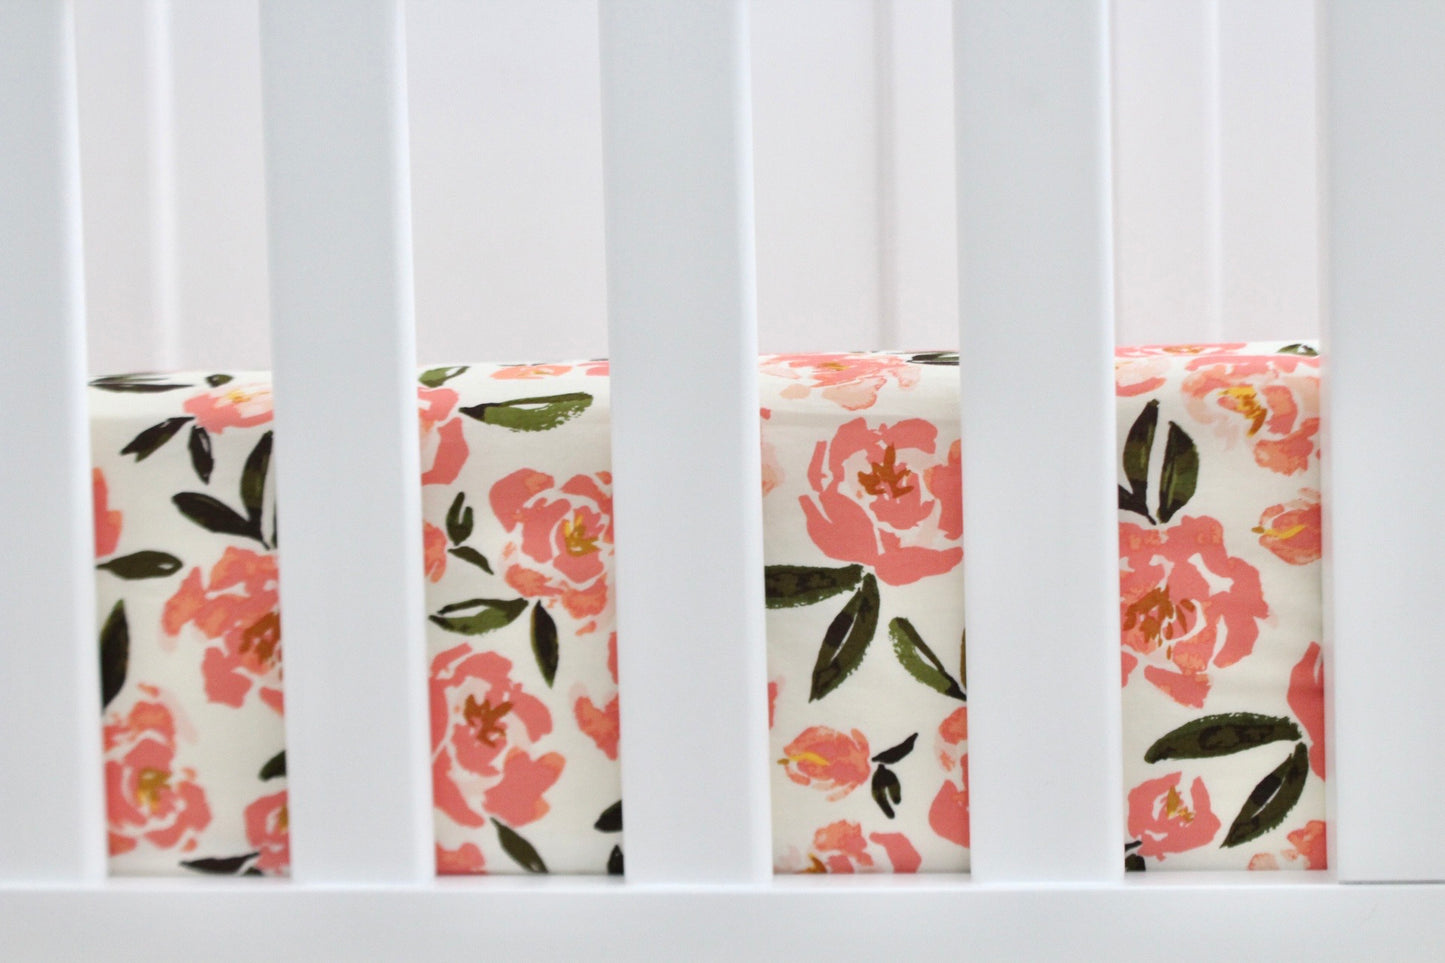 Peonies Crib Sheet or Changing Pad Cover